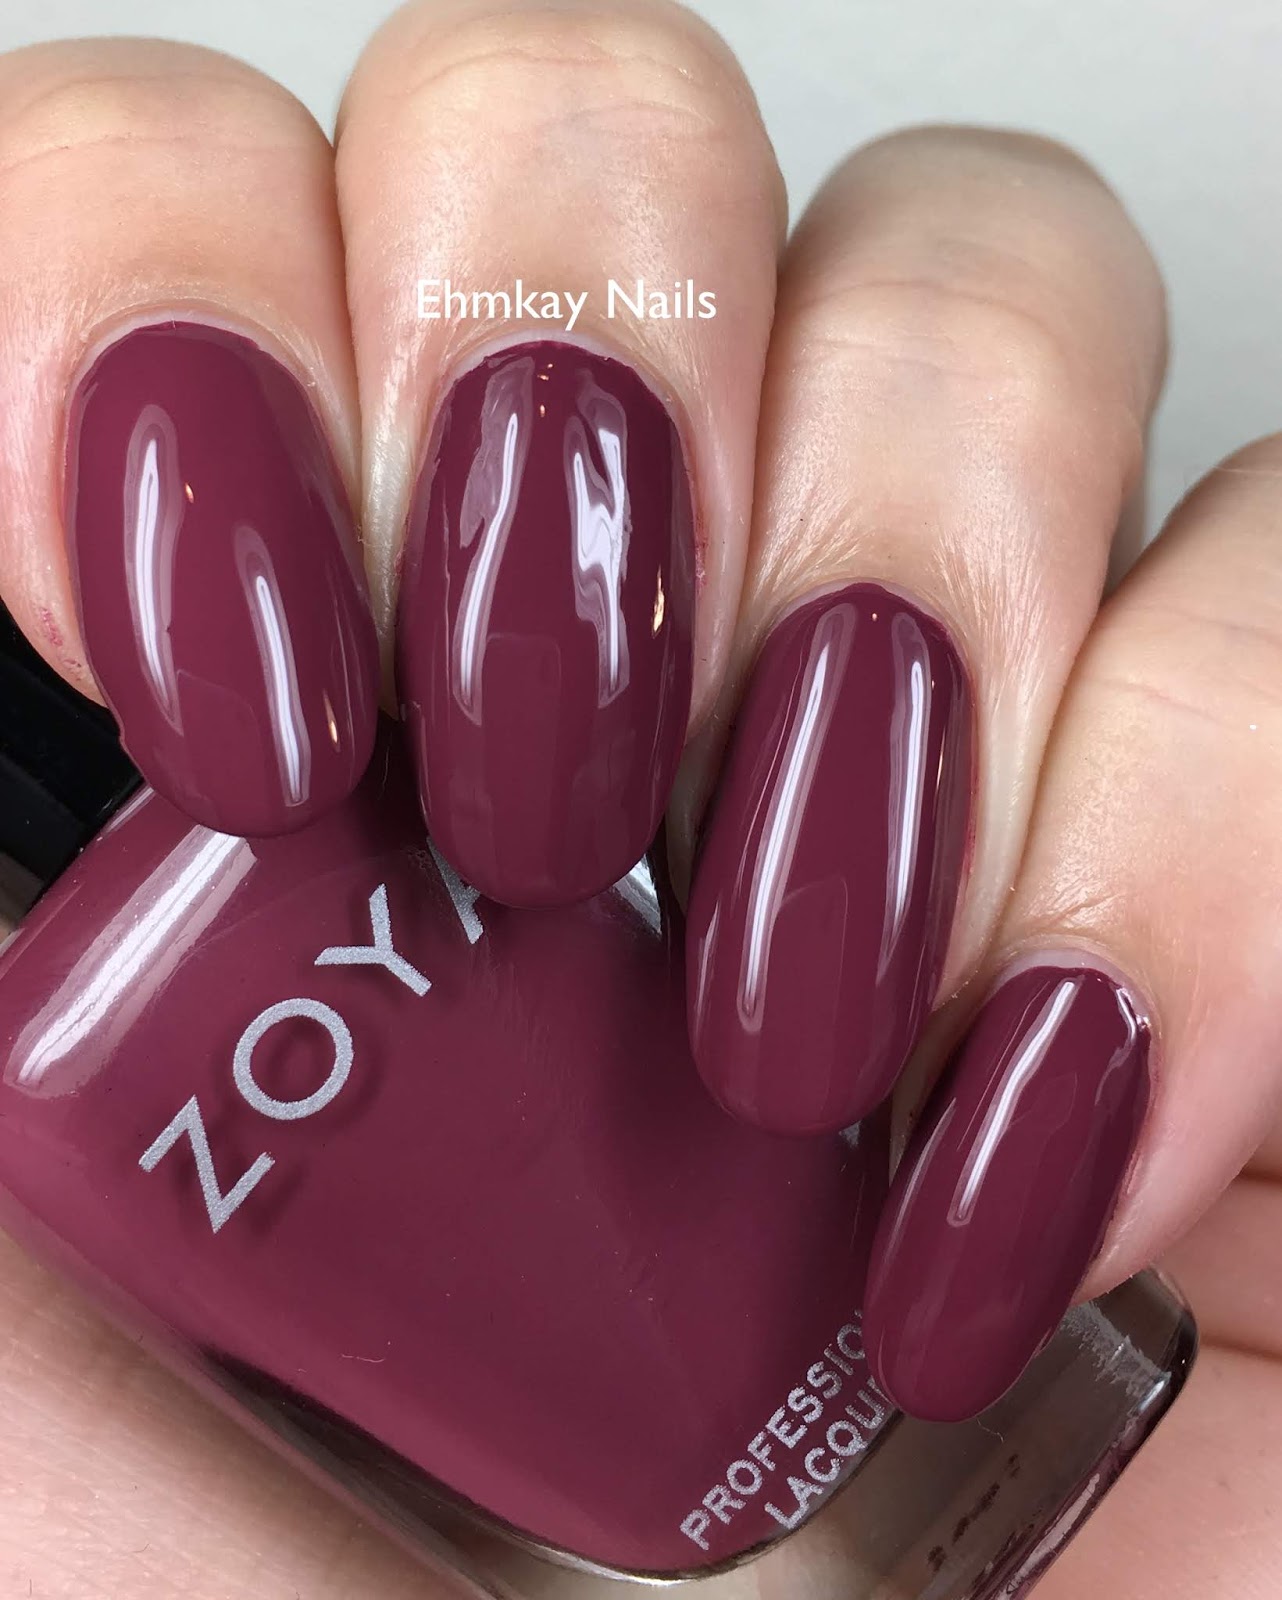 ehmkay nails: Zoya Element for Fall 2018, Swatches and Review